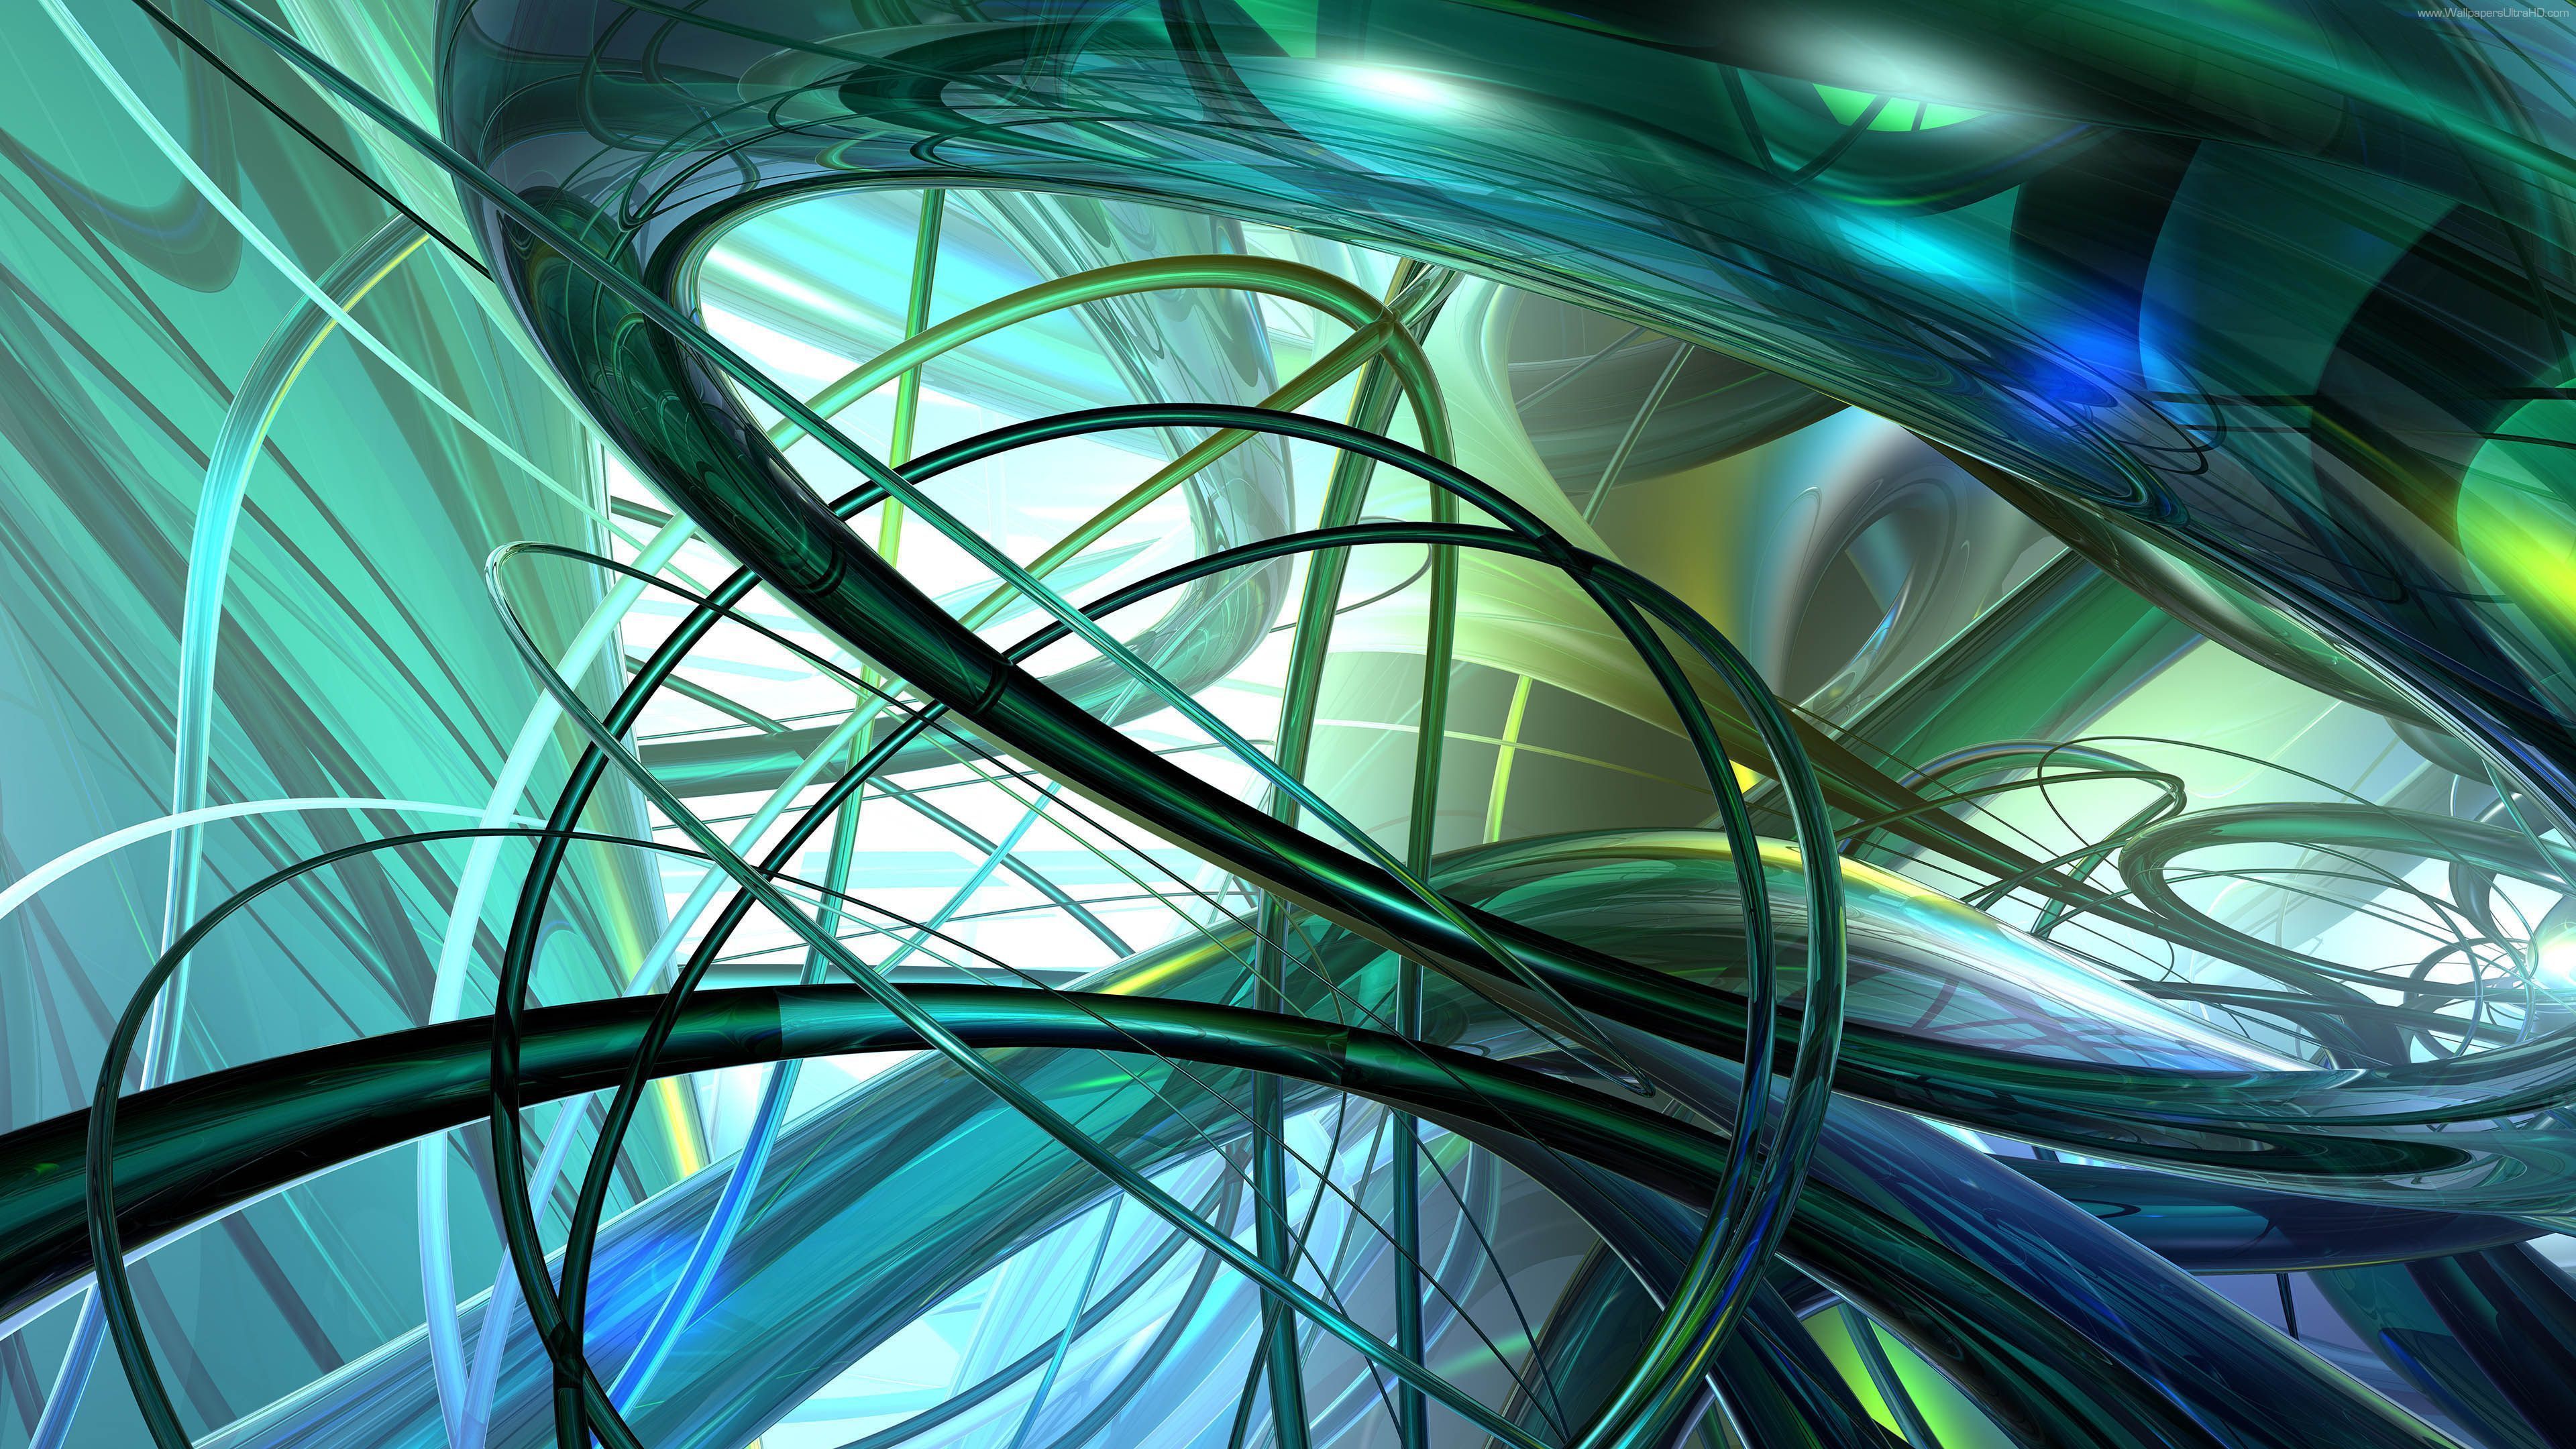 Abstract Green 3D Forms - 3840x2160 - 4K 16 / 9 Ultra HD, UHD